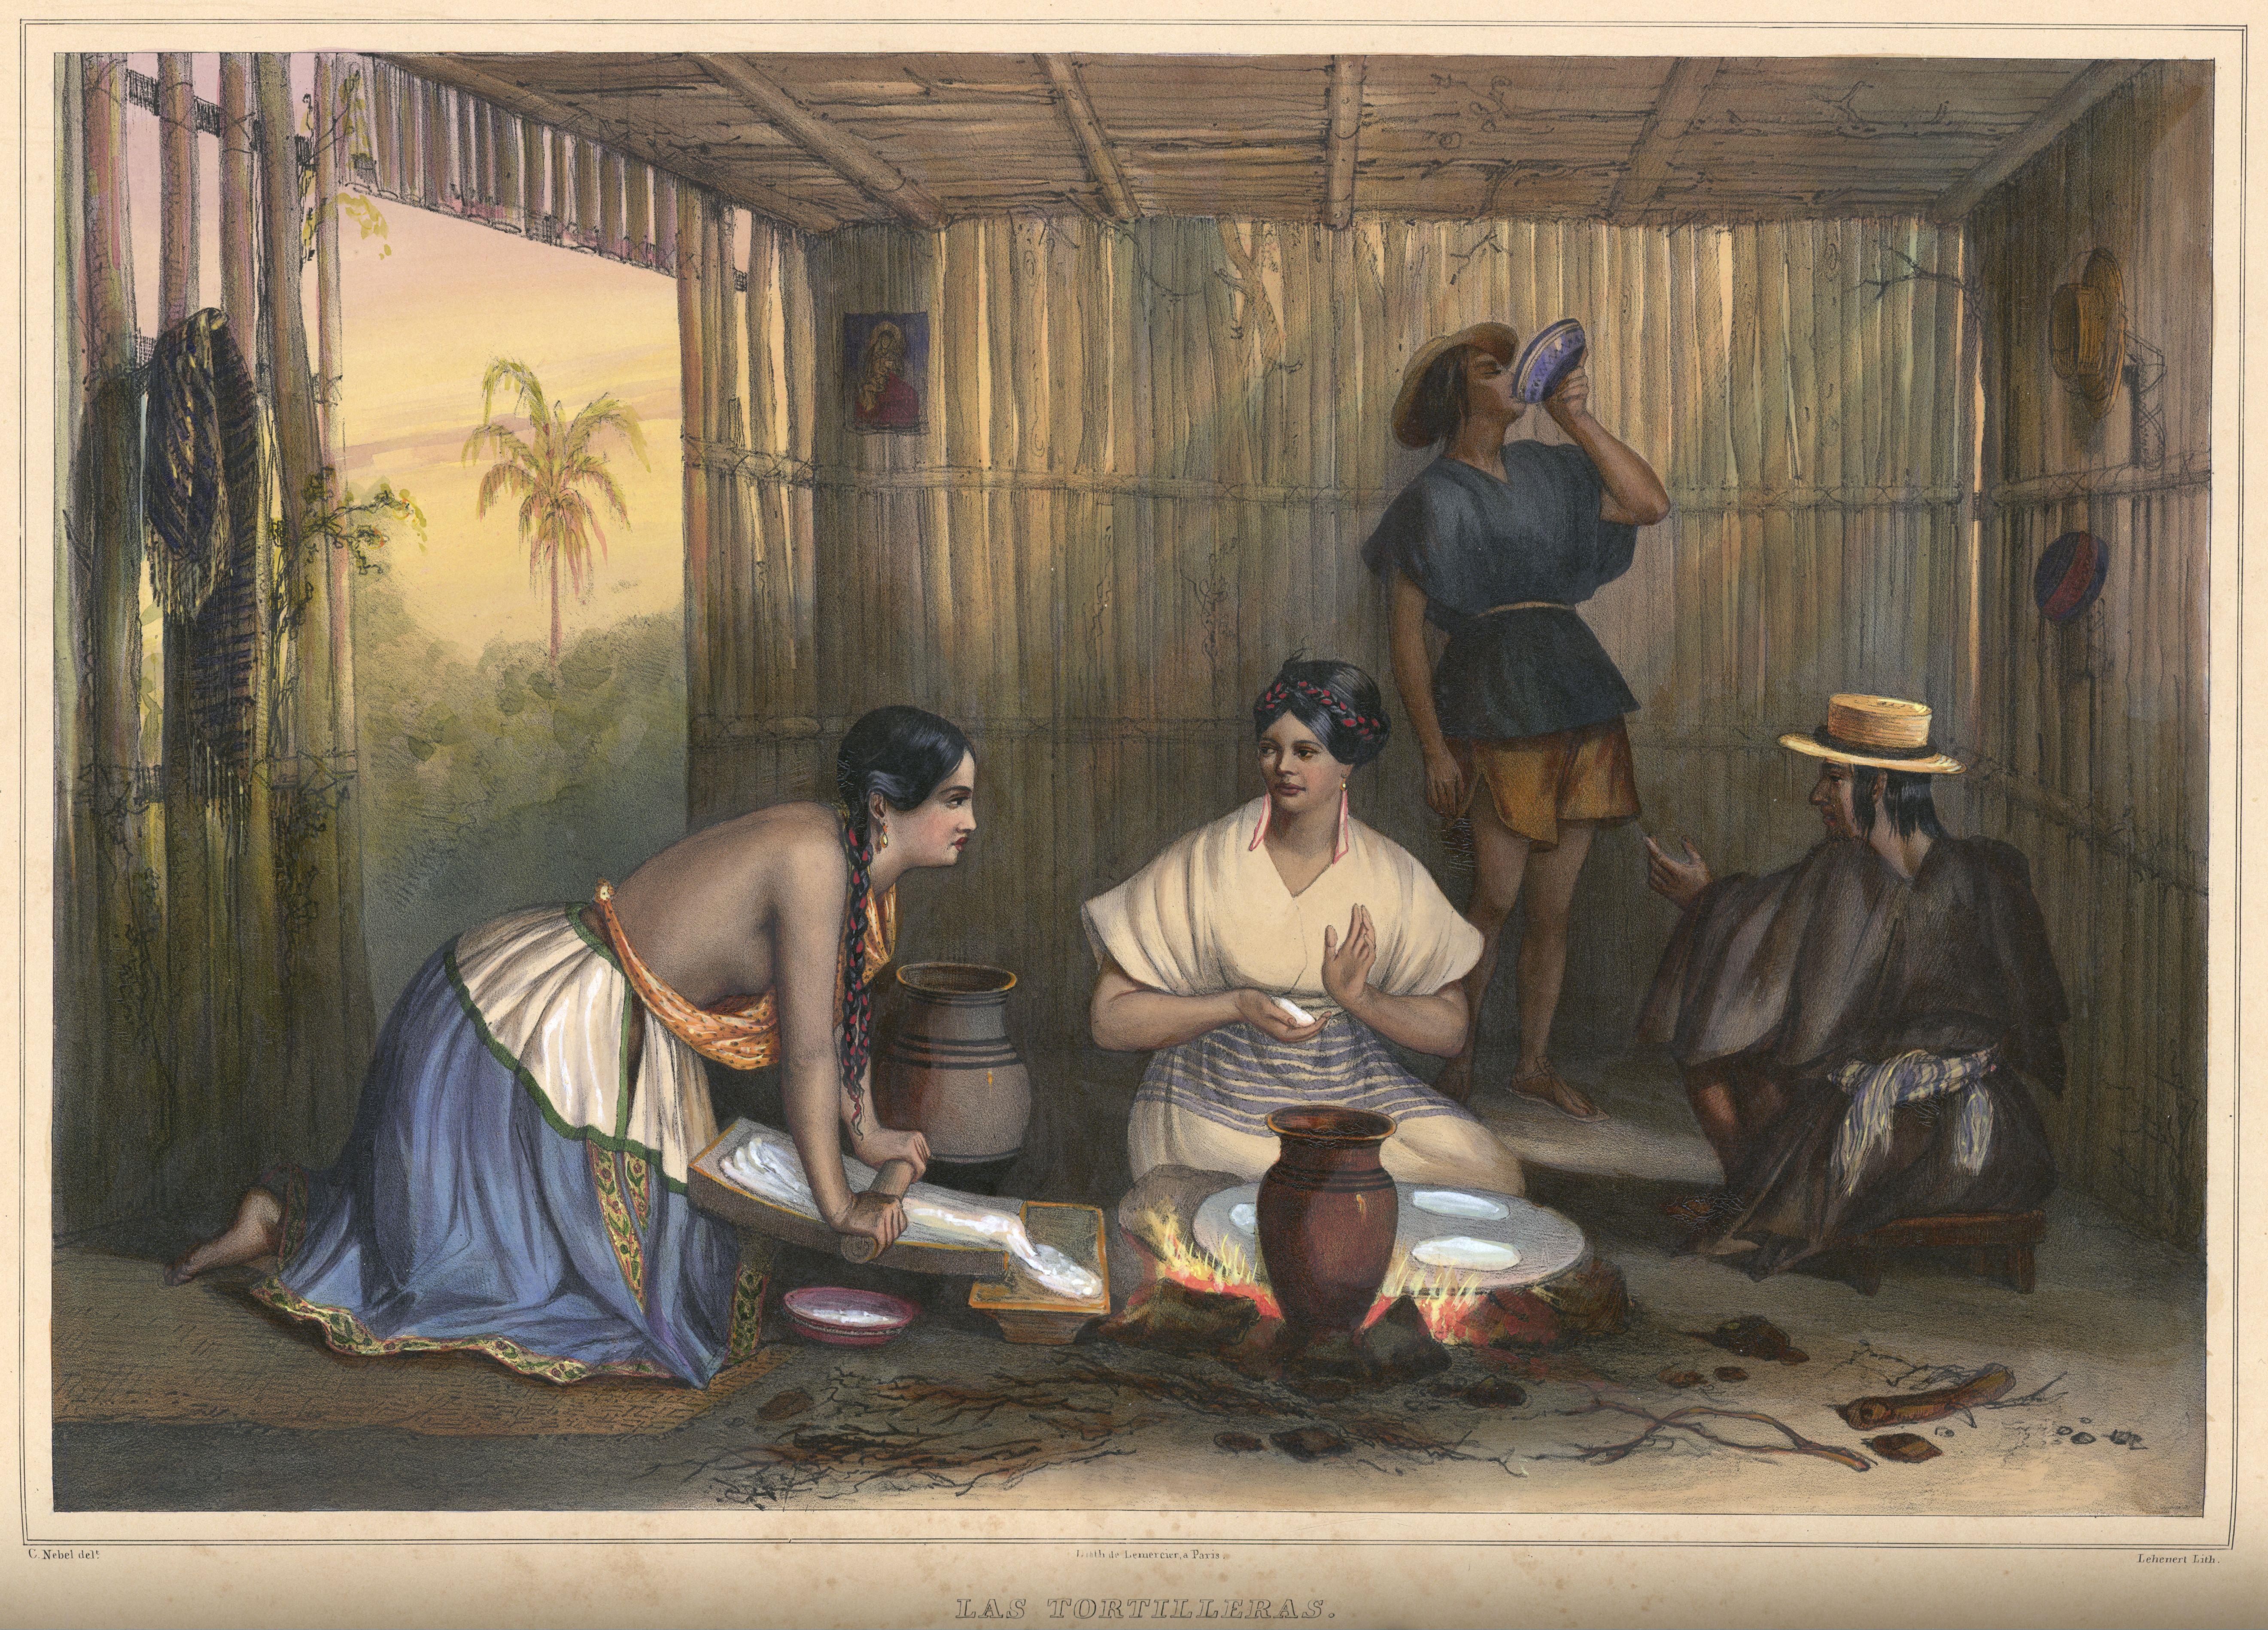 An 1836 lithograph of tortilla production in rural Mexico.